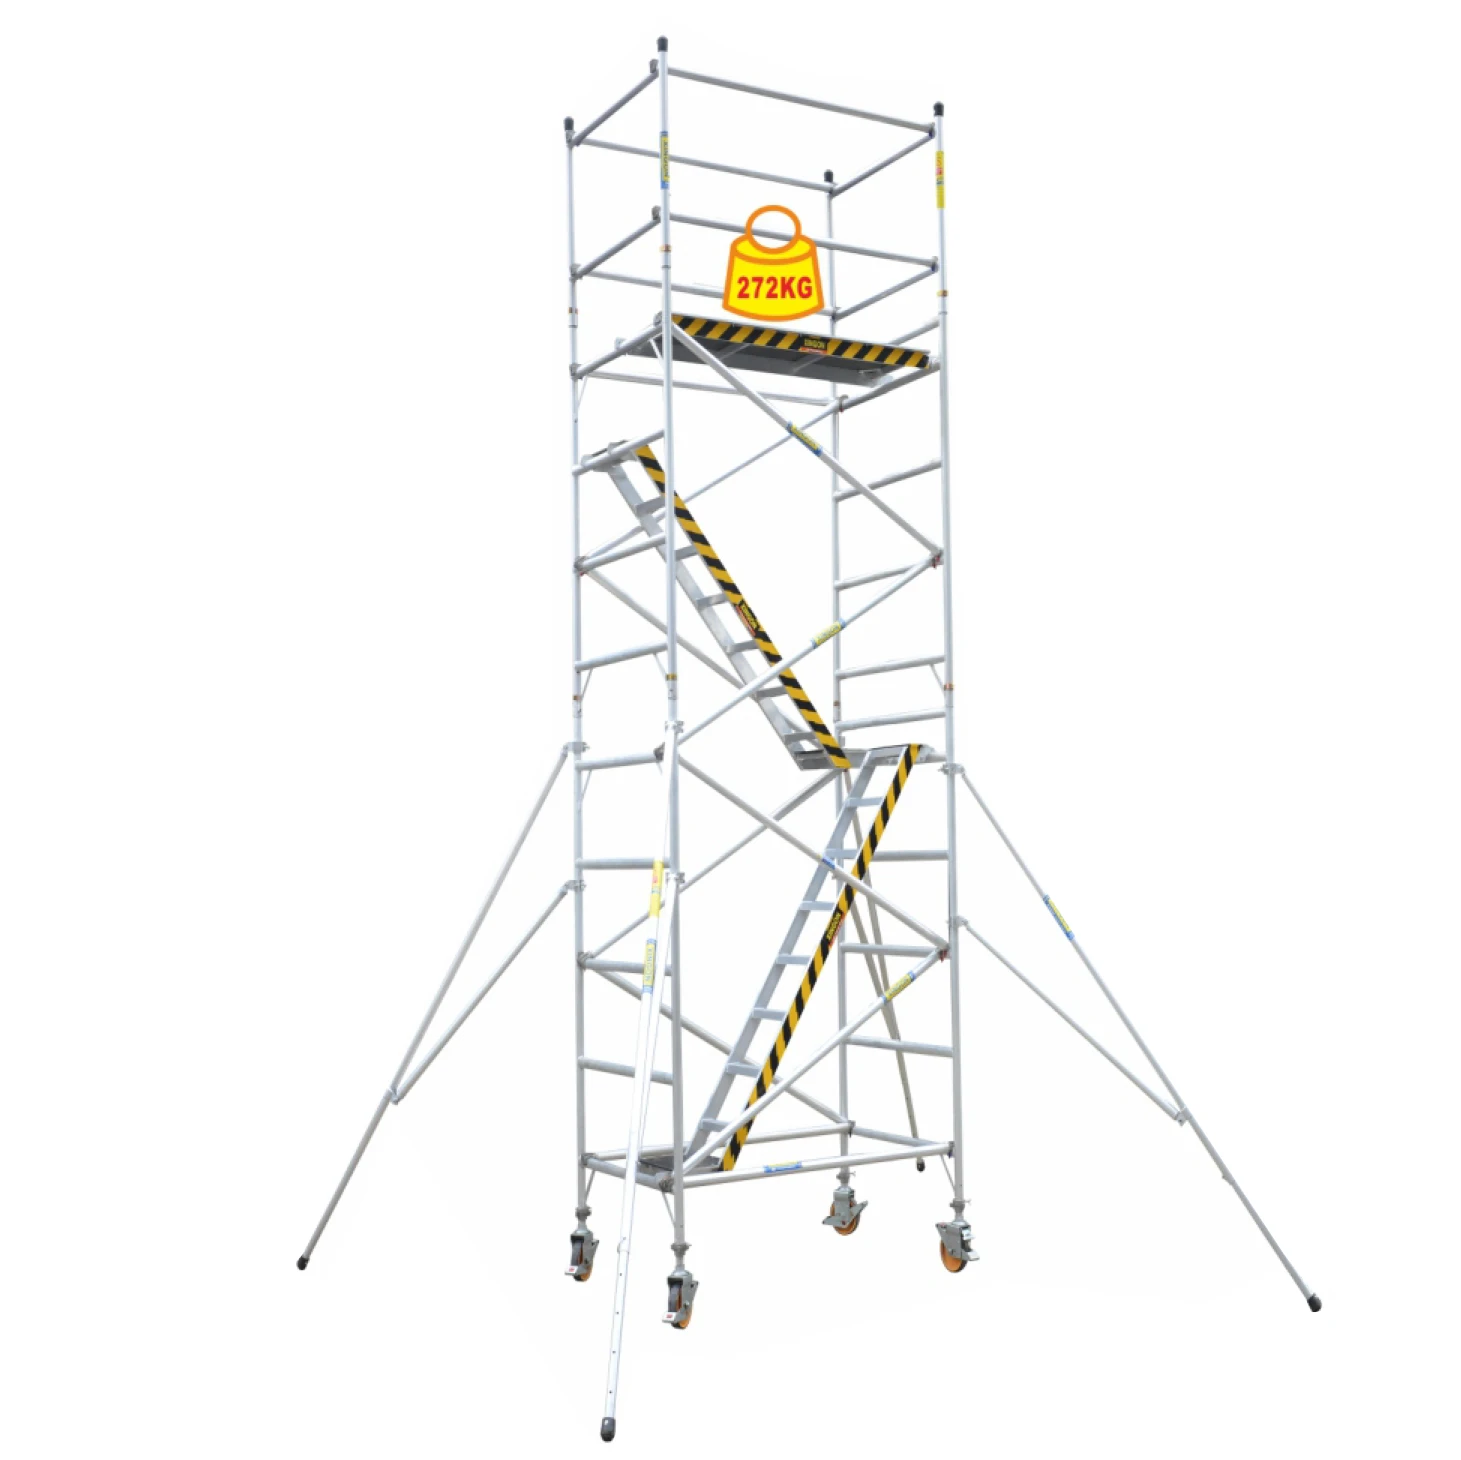 5 Sets Quick Stage Telescopic Mobile Leader For Sale Aluminum Tower Scaffolding Platform scaffolding for construction